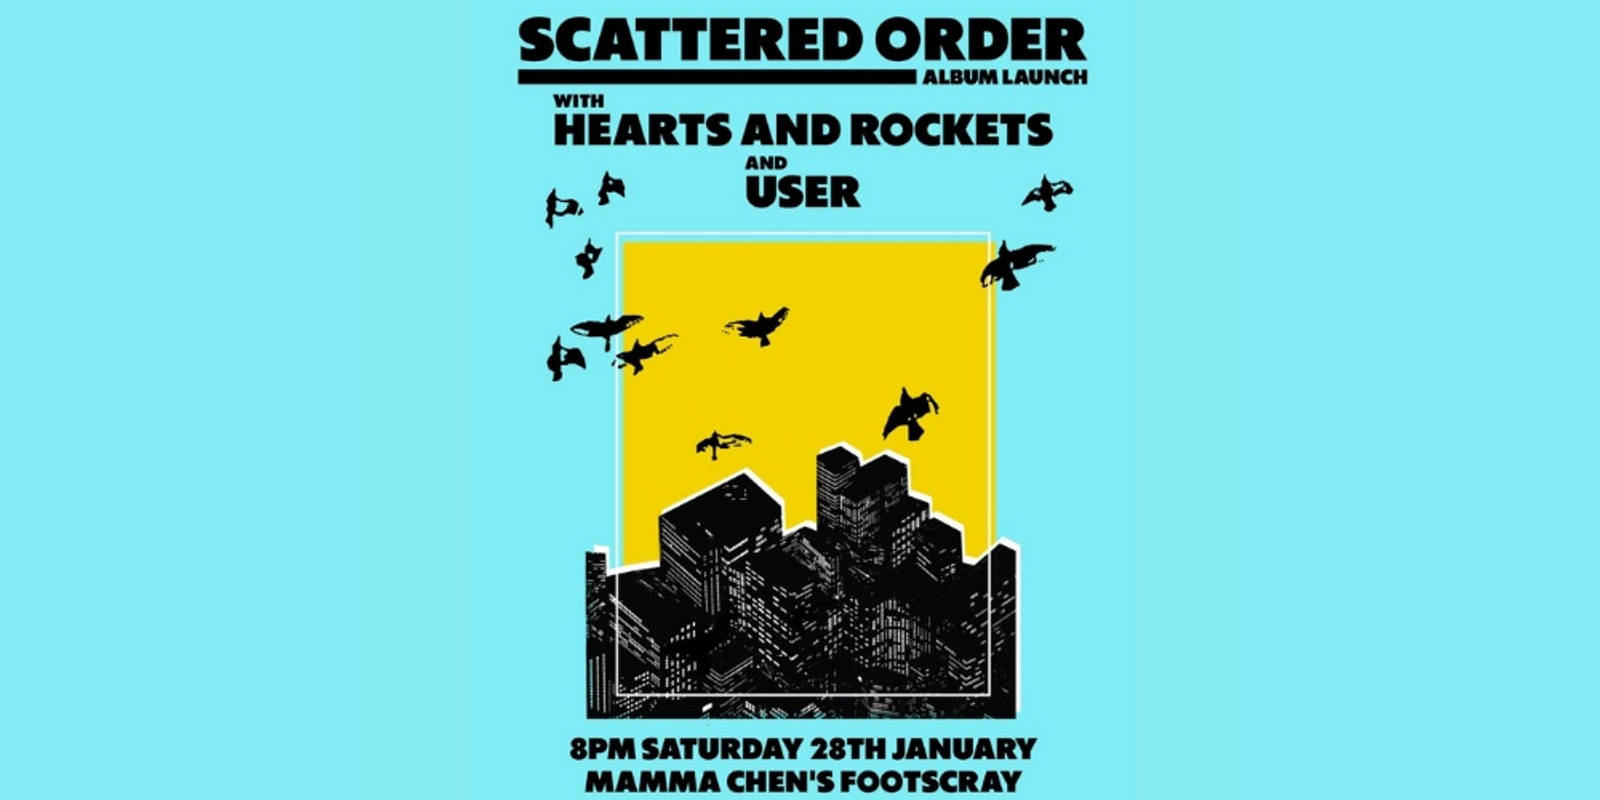 SCATTERED ORDER - ALBUM LAUNCH